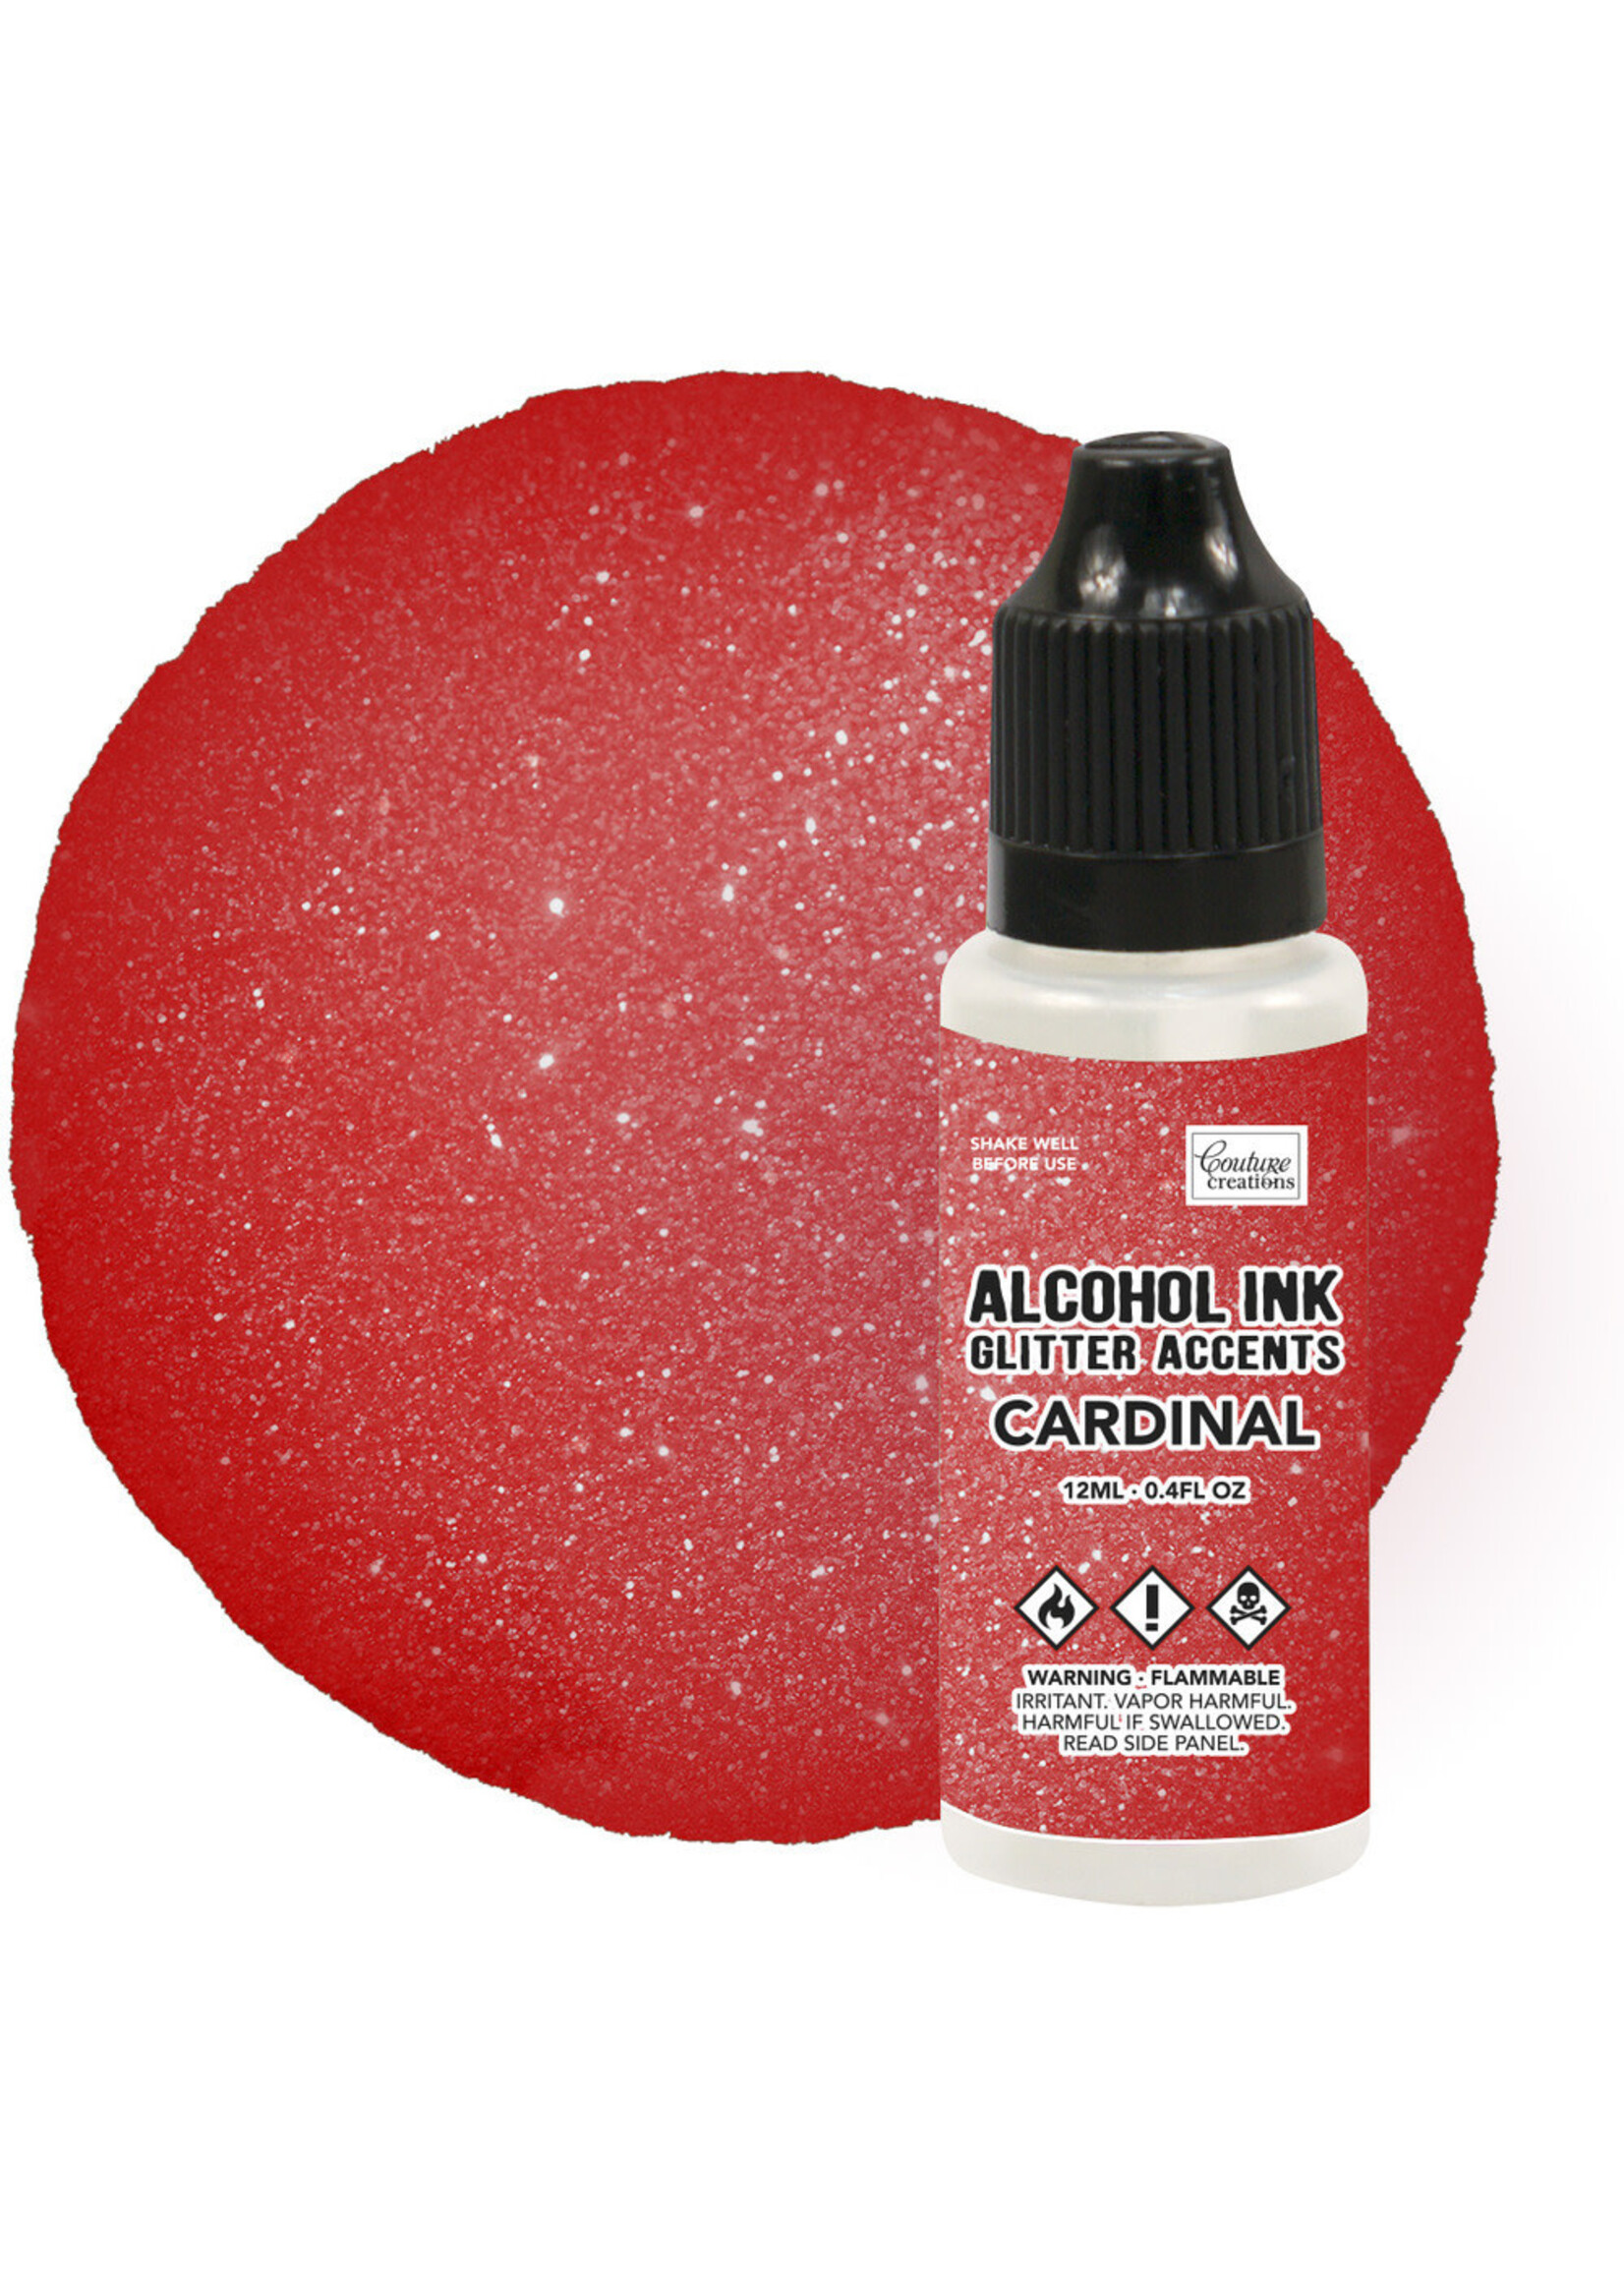 Couture Creations Couture Creations Alcohol Ink Glitter Accents, Cardinal